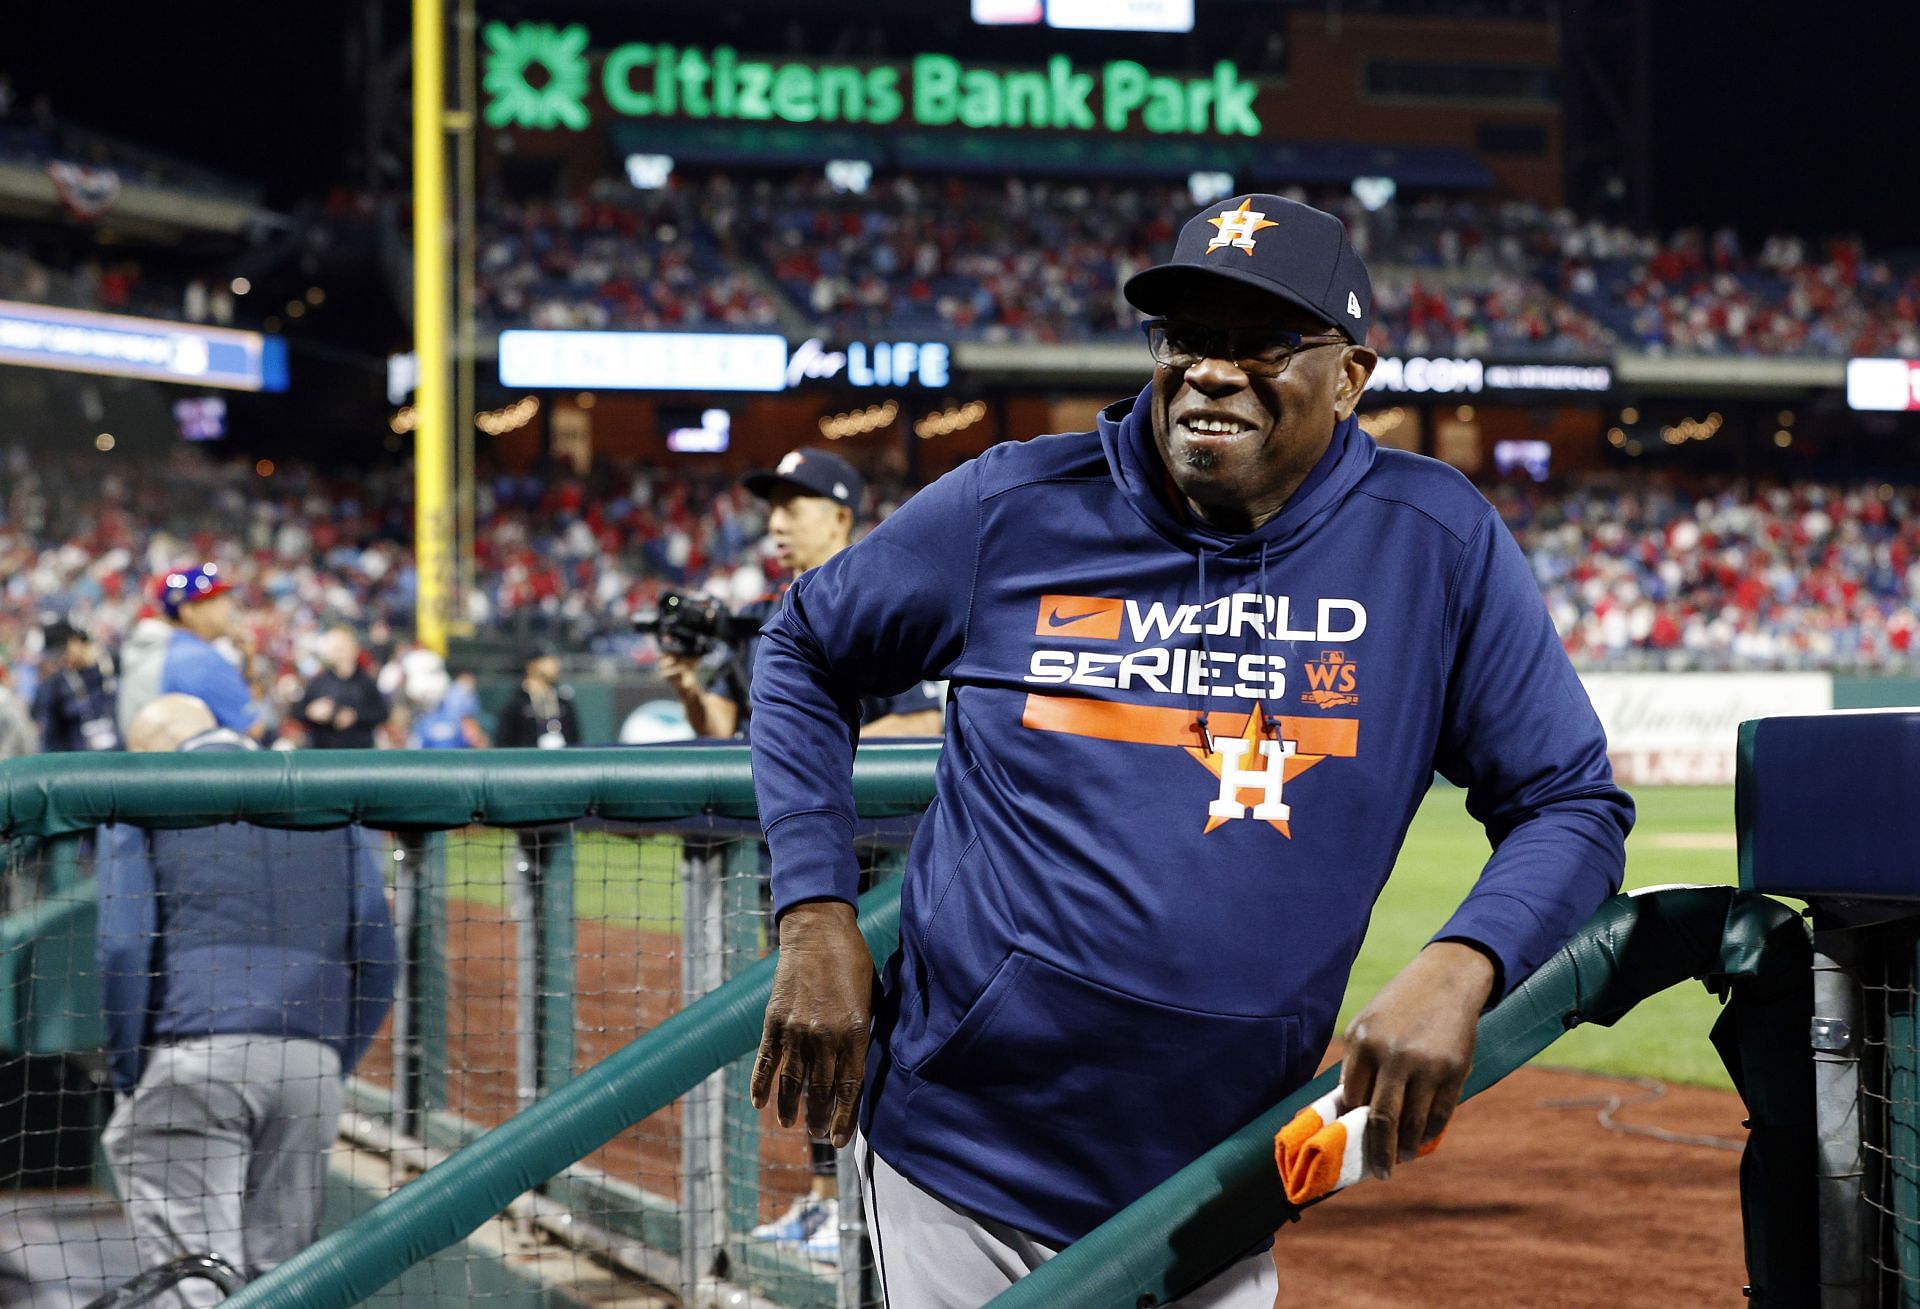 Manager Dusty Baker Jr. smiles in the dugout after the Astros defeated the Phillies at Citizens Bank Park